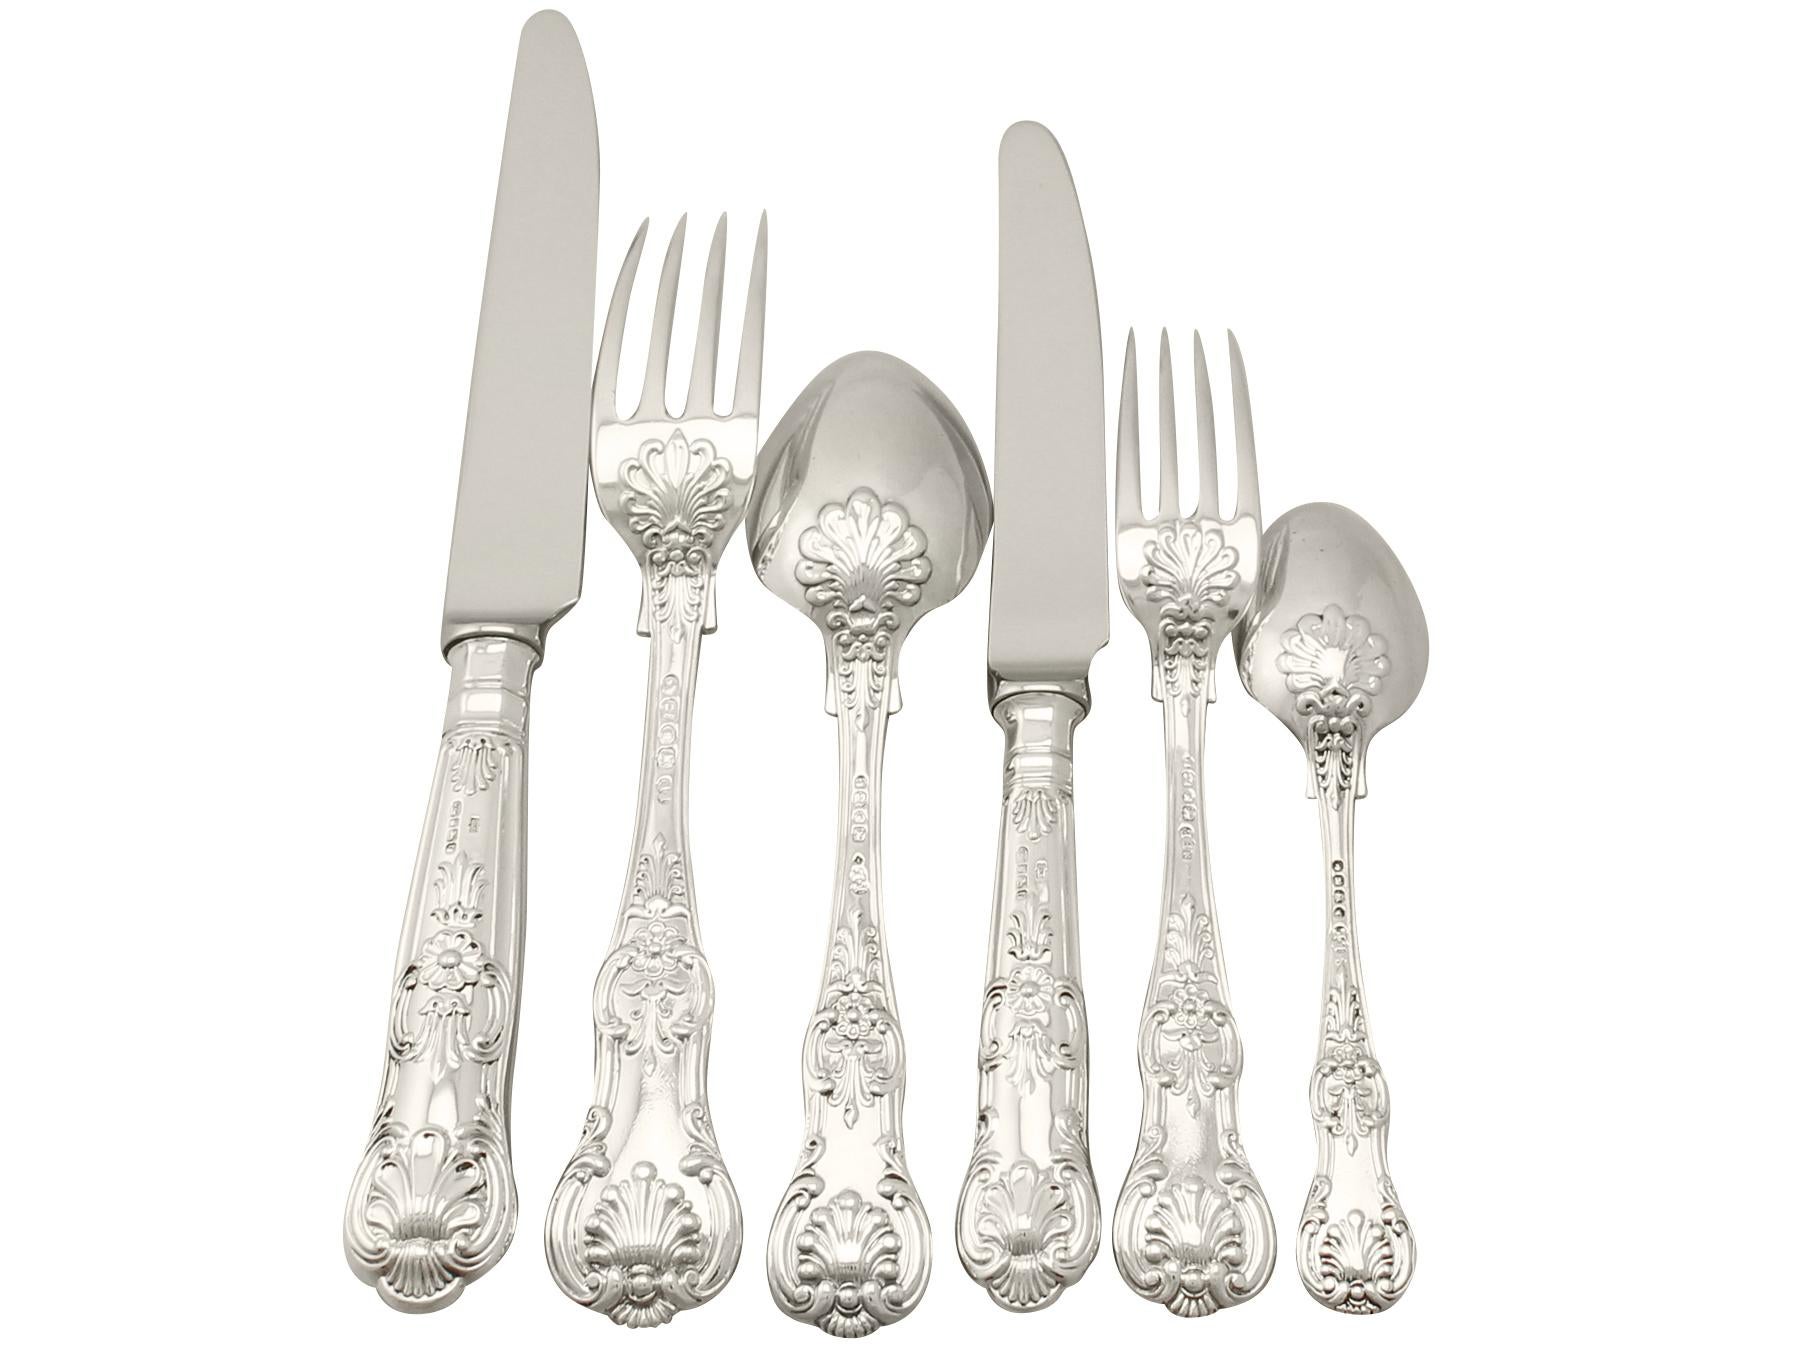 An exceptional, fine and impressive antique Victorian English sterling silver straight Queen's pattern flatware service for eighteen persons, an addition to our canteen of cutlery collection.

The pieces of this exceptional, antique Victorian